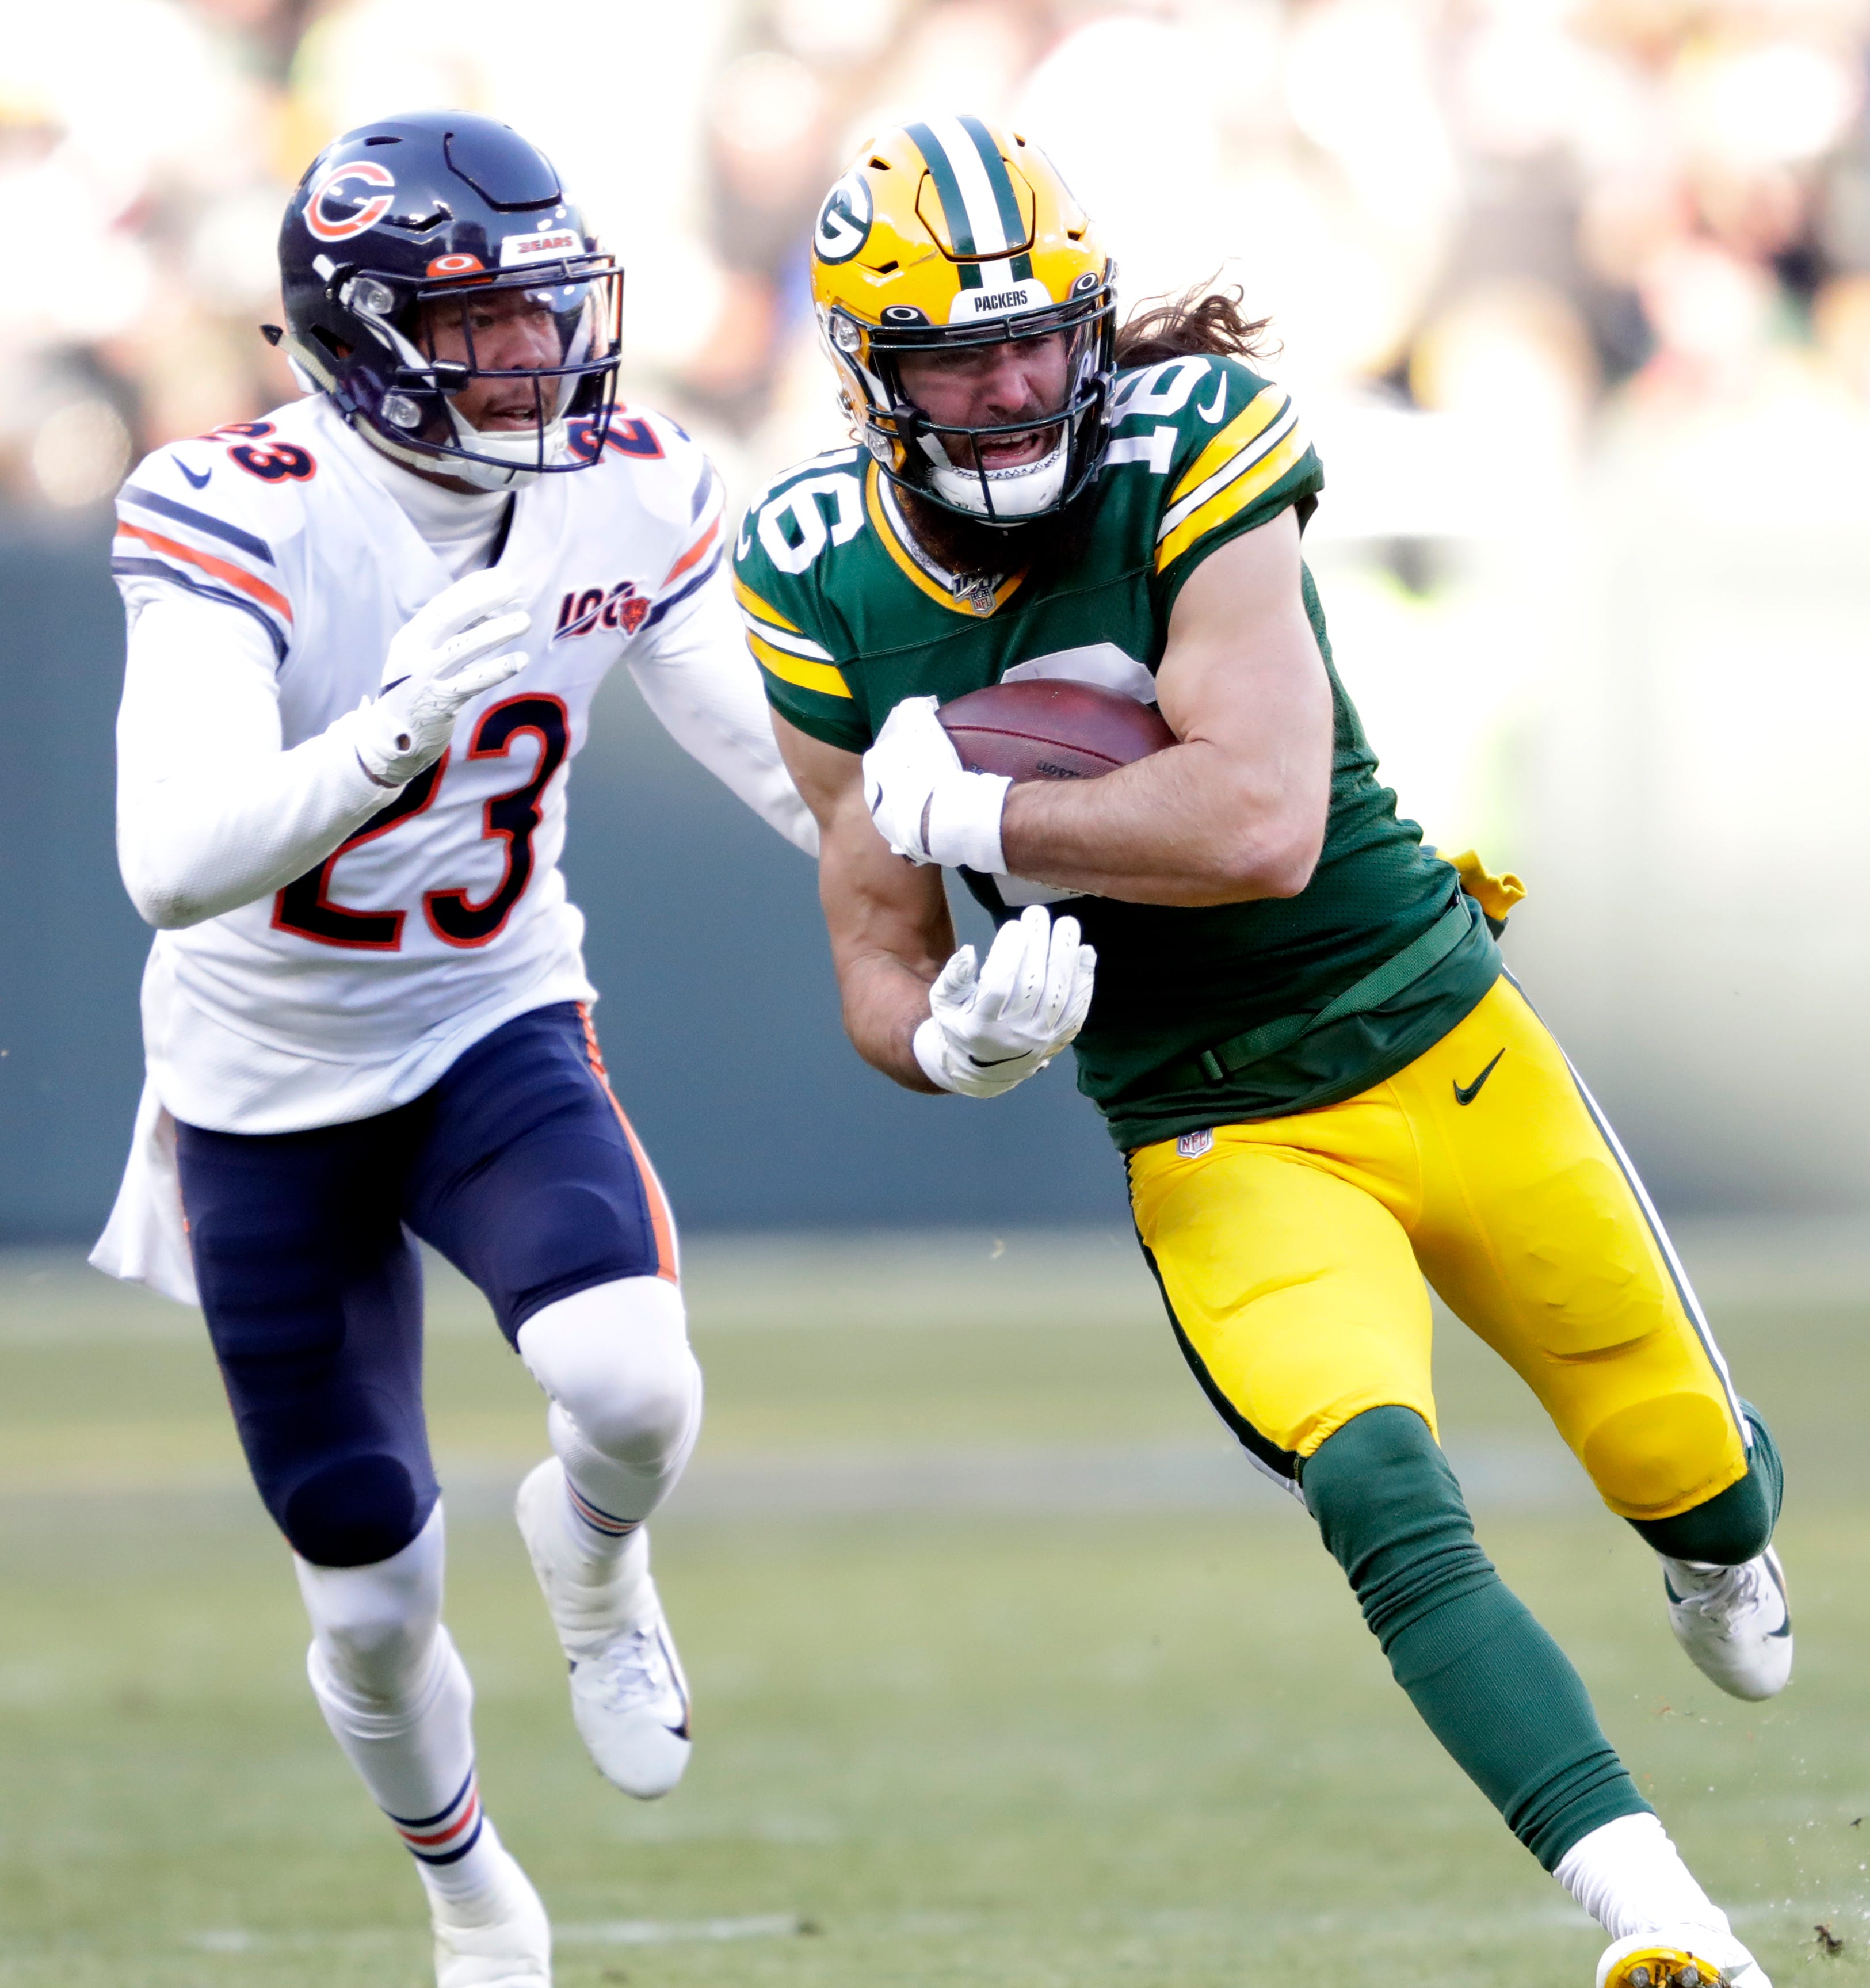 Green Bay Packers wide receiver Jake Kumerow (16) runs for a first down on a long reception against Chicago Bears cornerback Kyle Fuller (23) in the third quarter Sunday, December 15, 2019, at Lambeau Field in Green Bay, Wis.